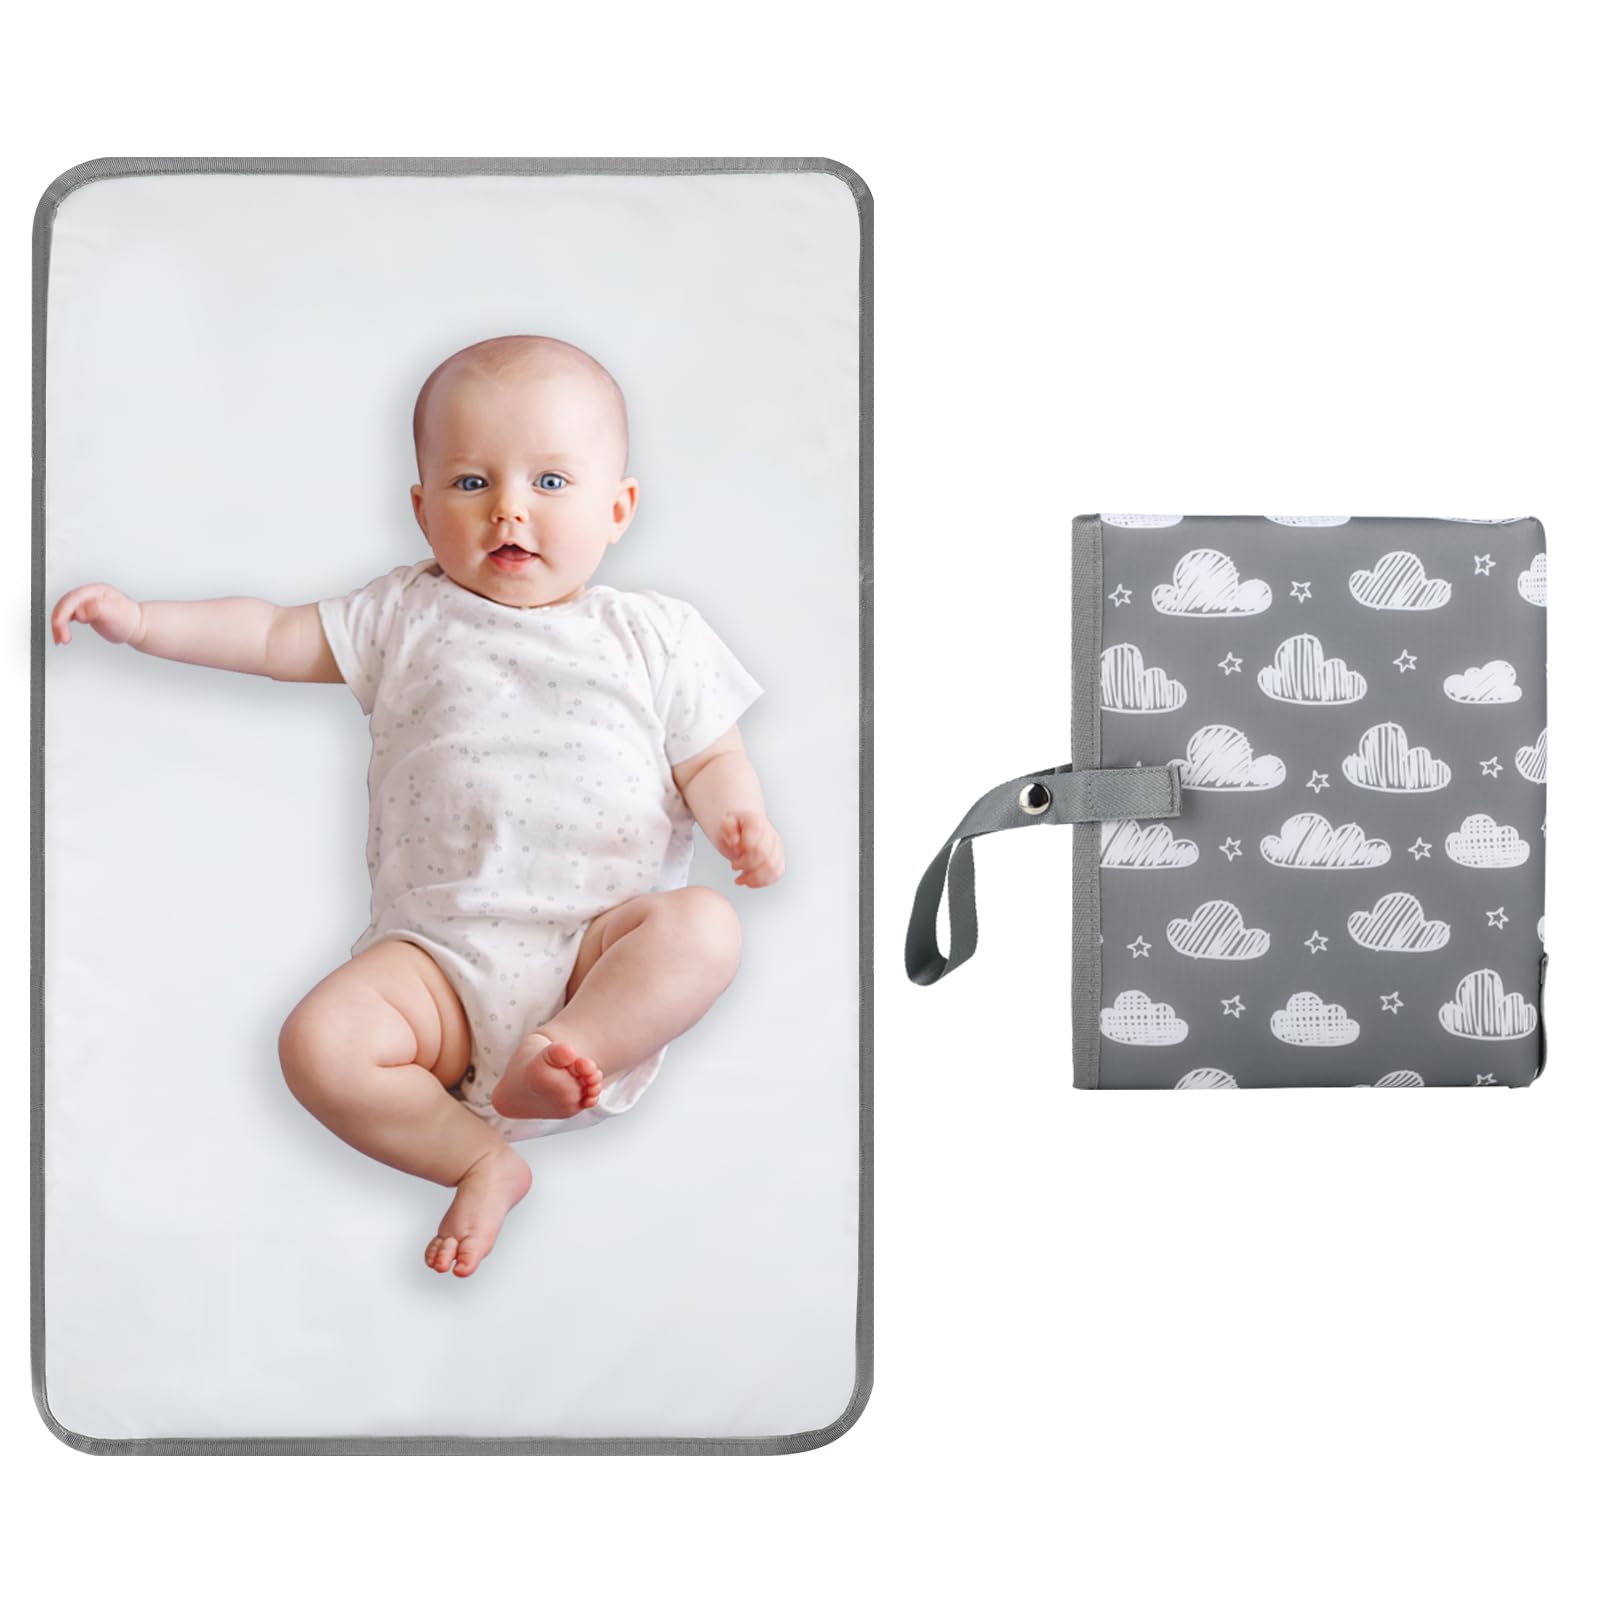 PHOEBUS BABY Portable Changing Pad - Waterproof Compact Diaper Changing Mat - Foldable Lightweight Travel Changing Station, Newborn Shower Gifts(Grey)